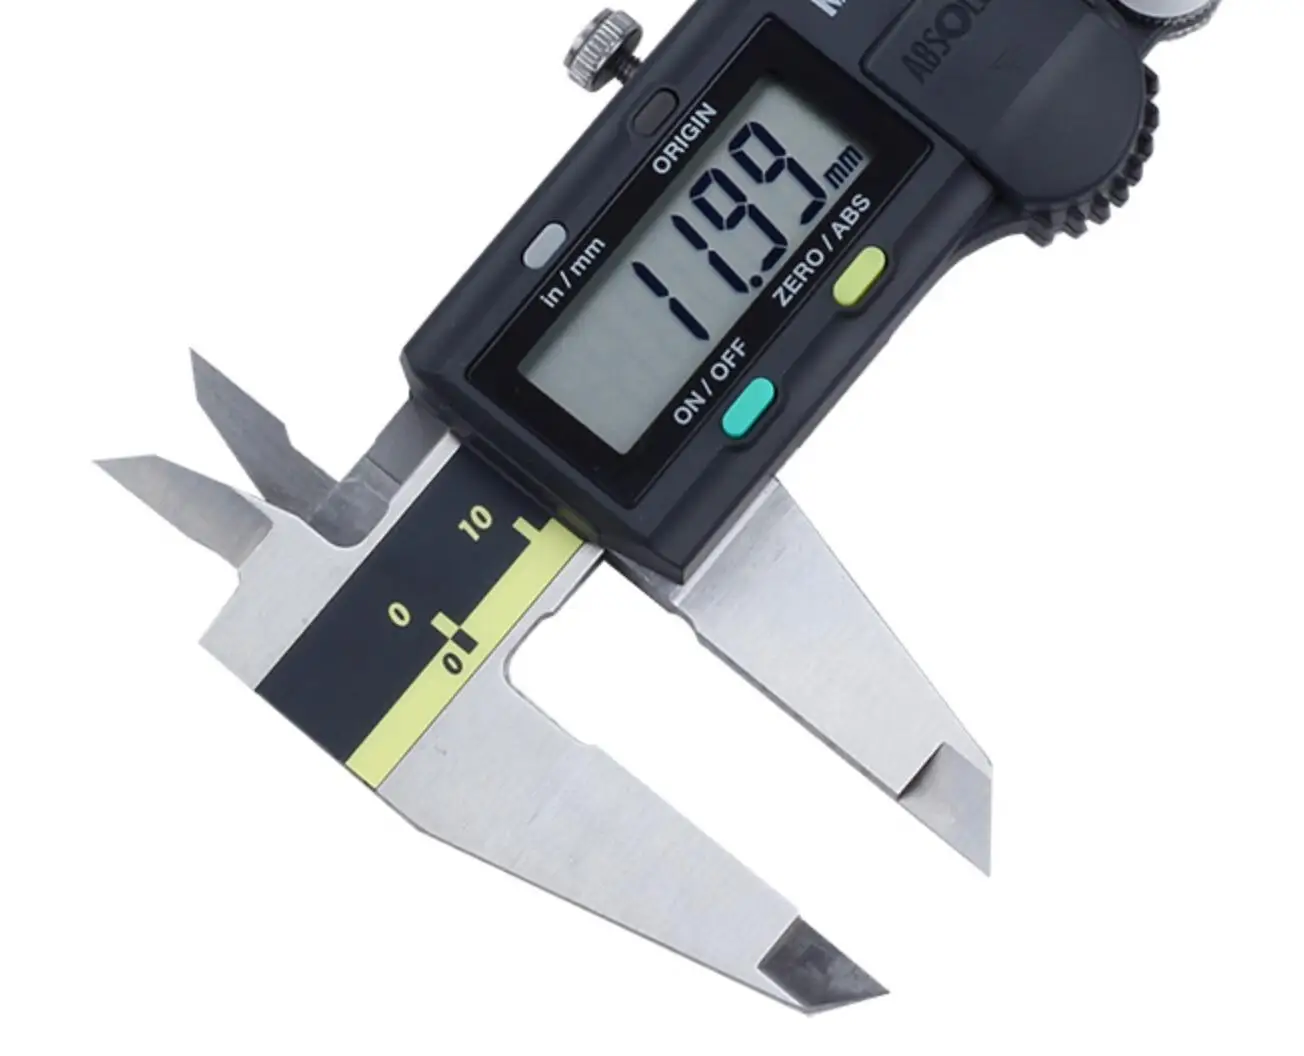 

NEW Mitutoyo CNC inmm Digital Vernier Calipers 0-8inch 0-200mm 500-197-30 Caliper LCD Electronic Measuring Stainless Steel Tools